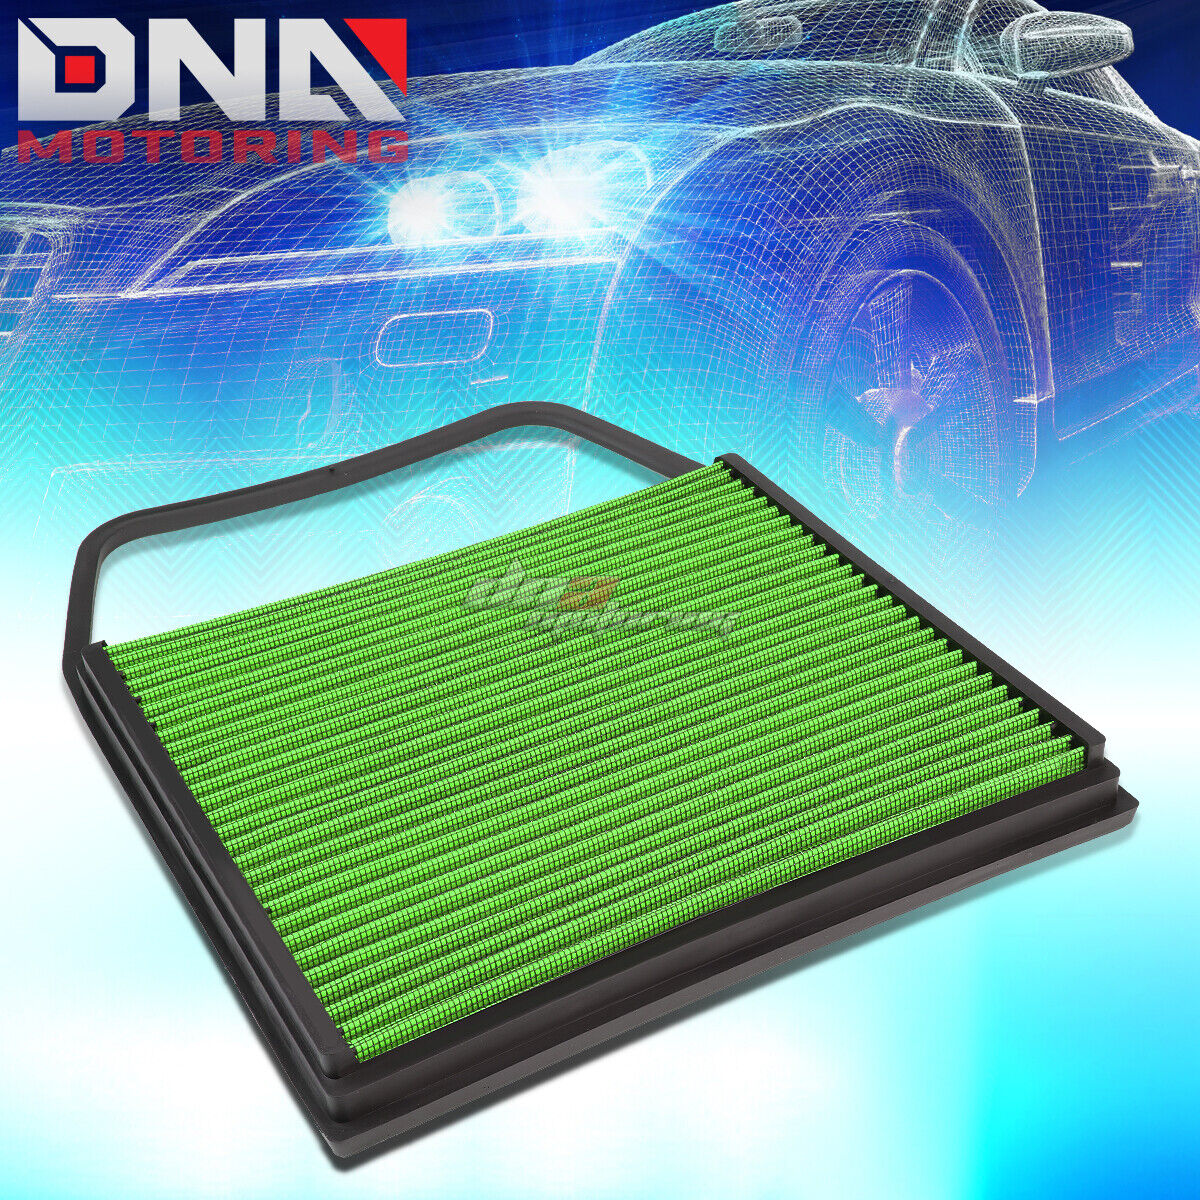 FOR 09-16 BMW Z4 10-14 X6 M GREEN REPLACEMENT RACING DROP IN AIR FILTER PANEL